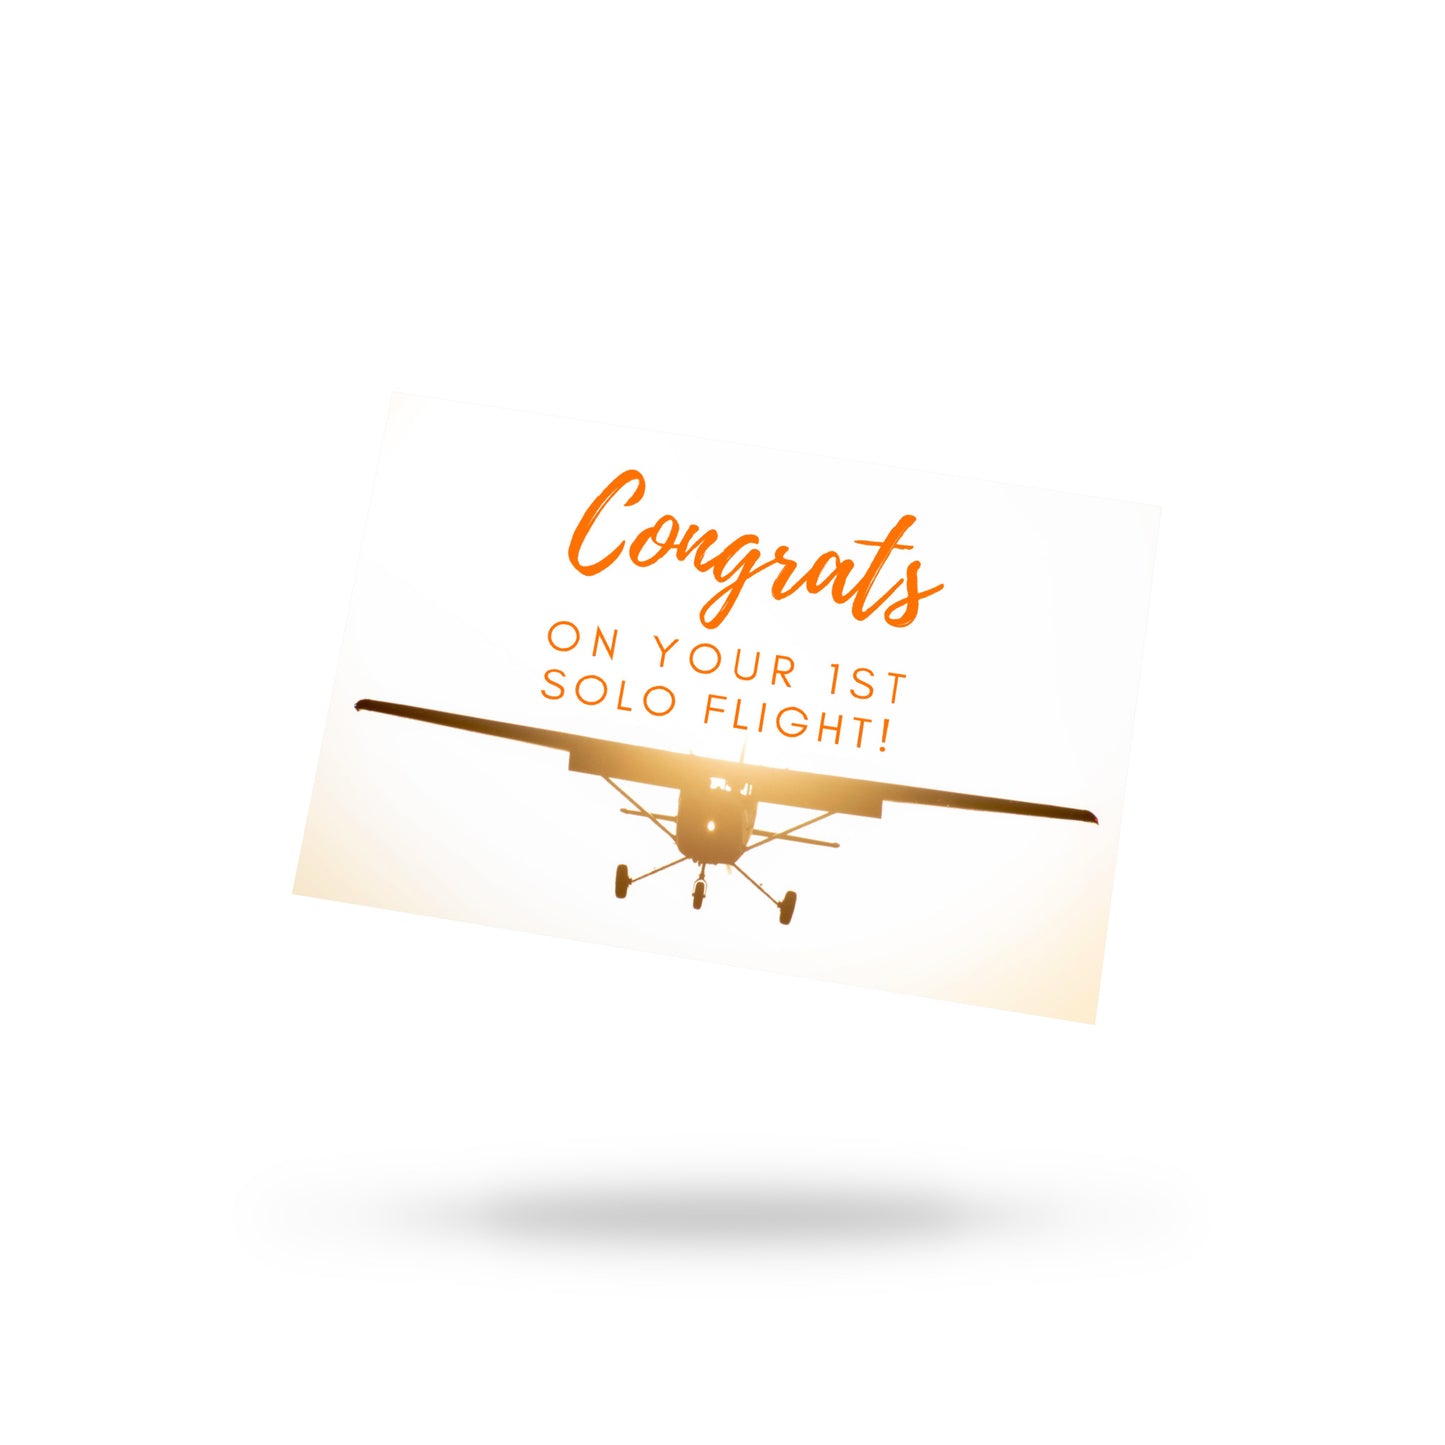 Congrats on your 1st Solo Flight! - postcard (sunset)